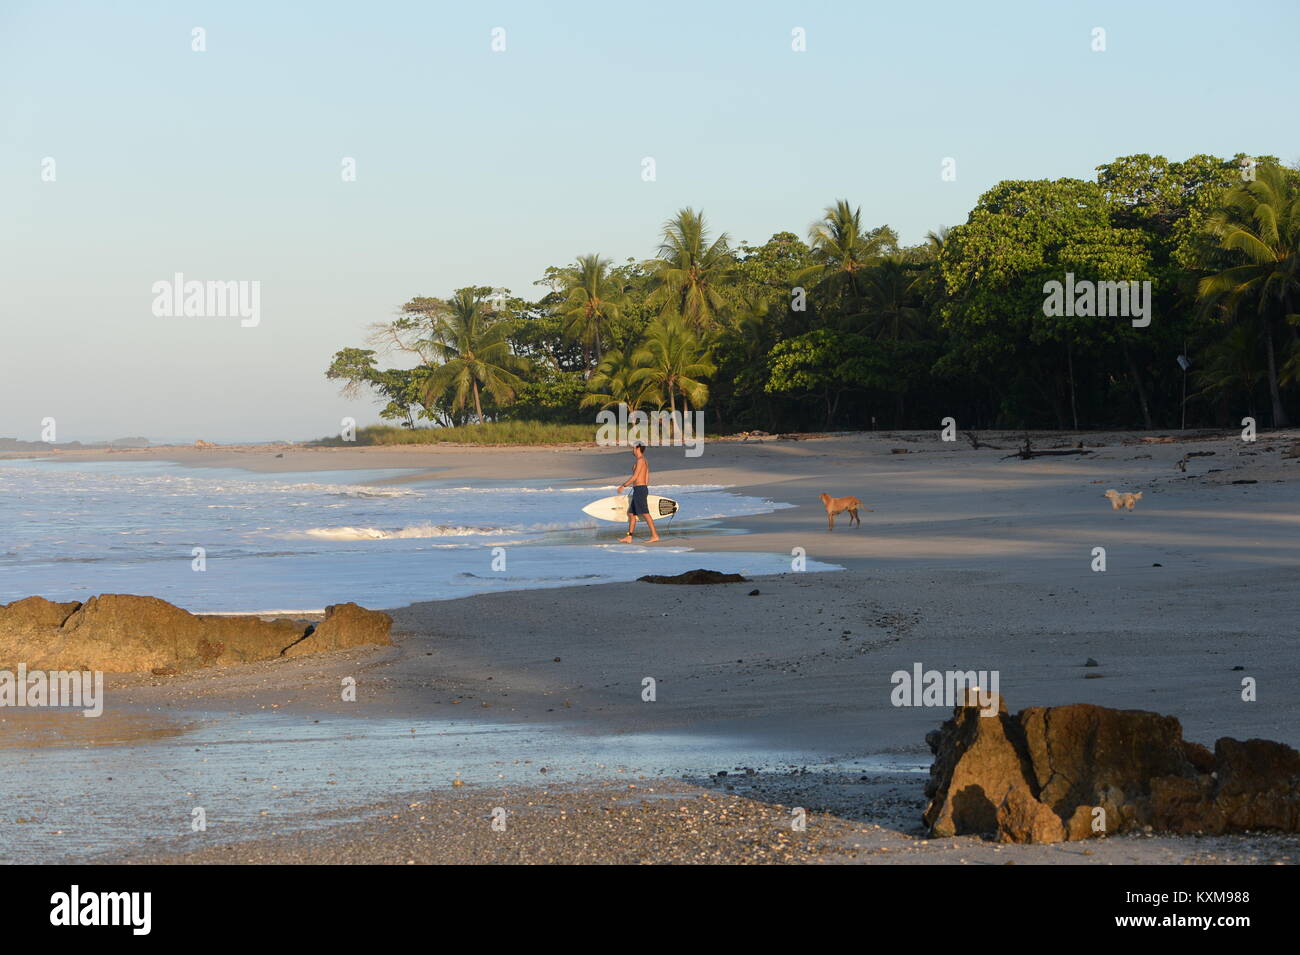 Surfing in Costa Rica on a palm fringed west coast beach Stock Photo